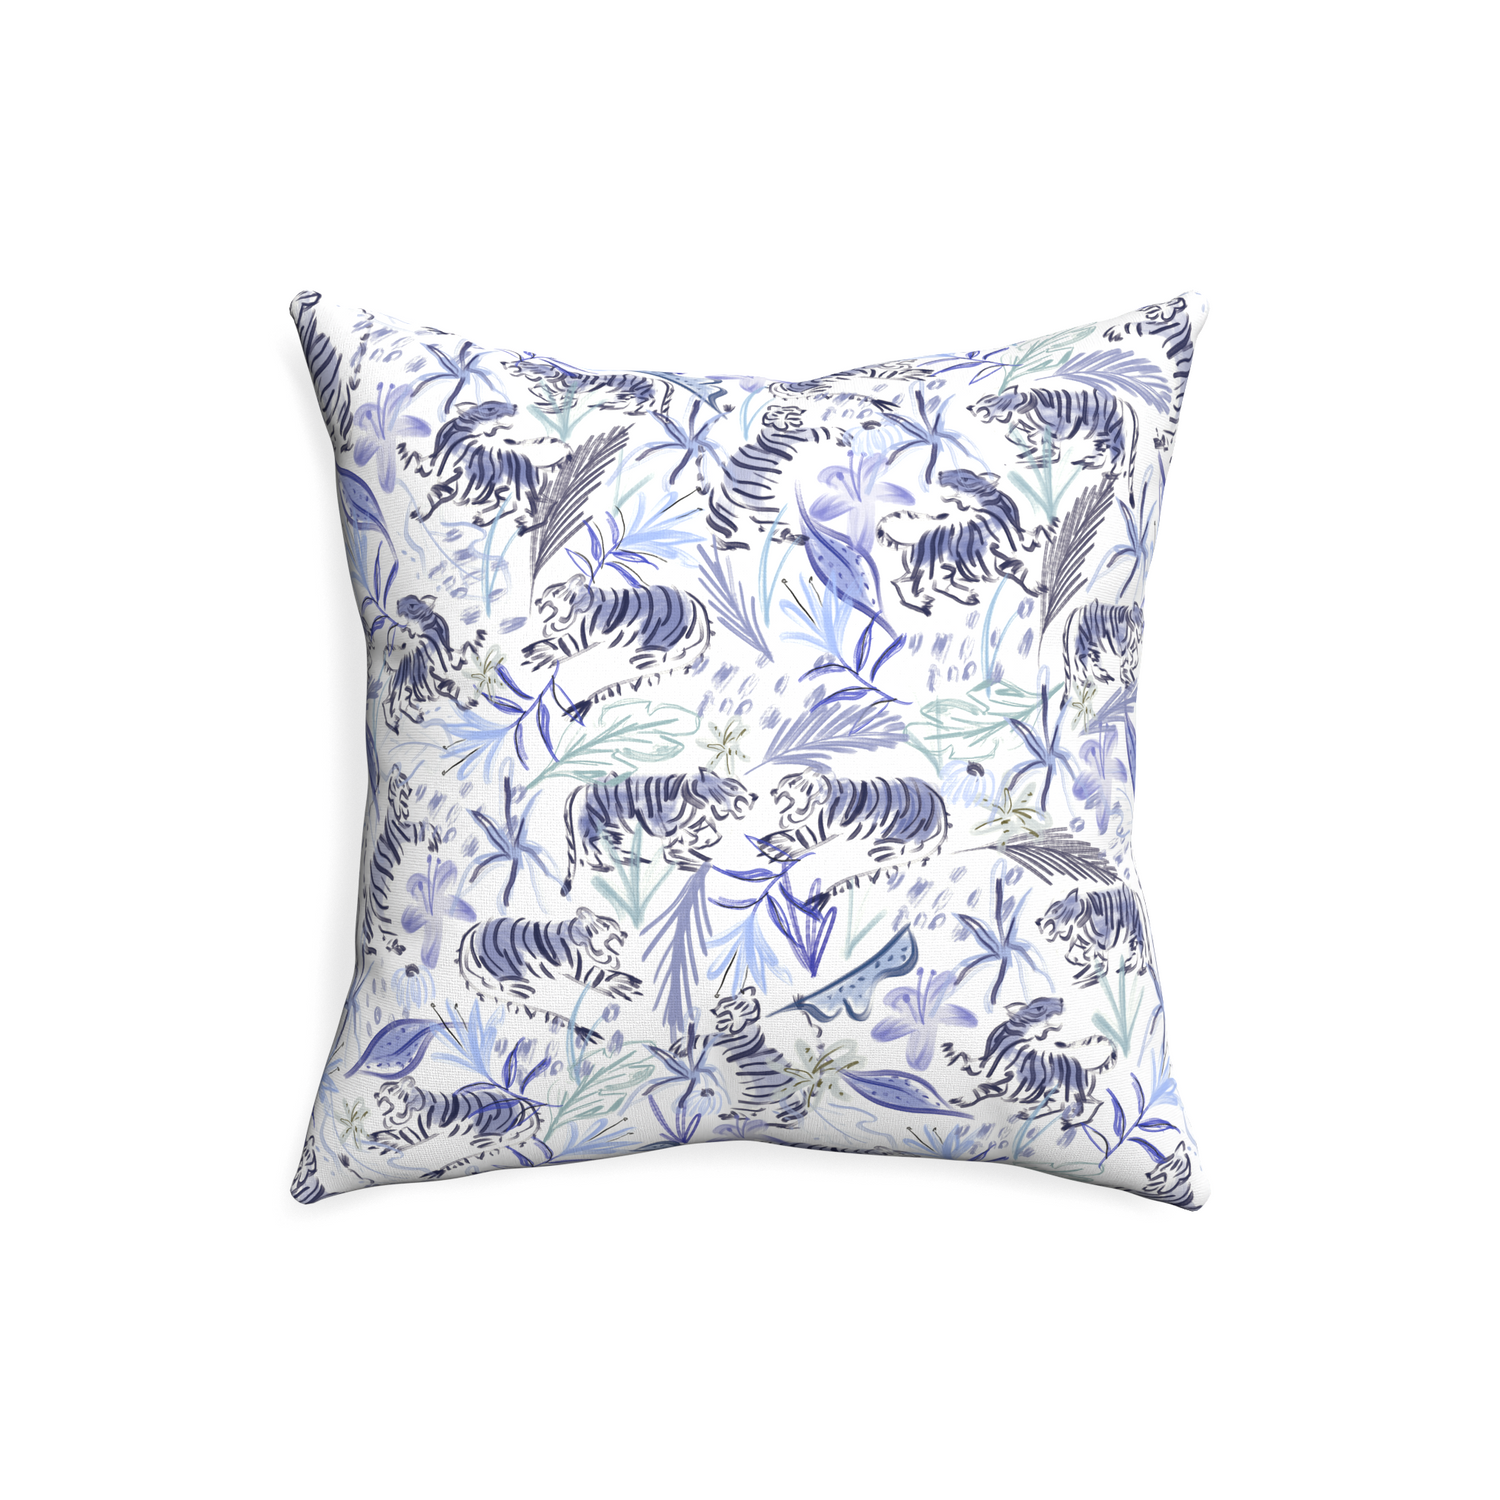 20-square frida blue custom blue with intricate tiger designpillow with none on white background